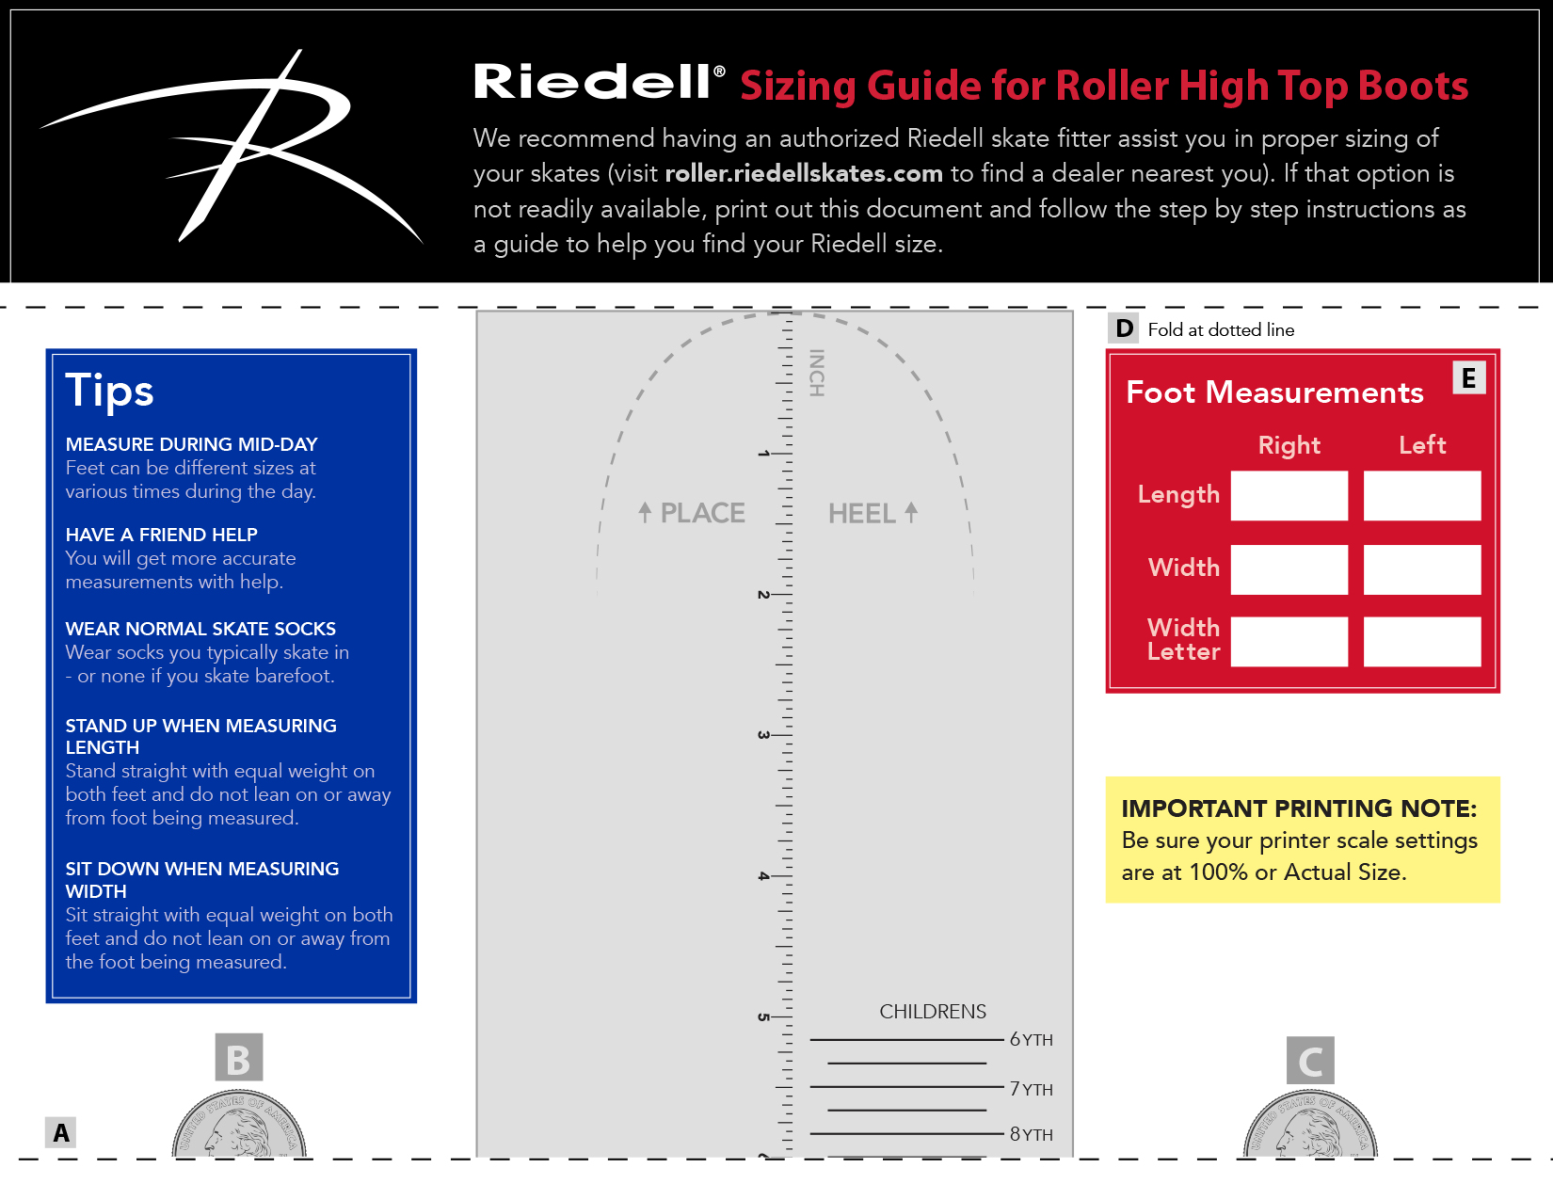 Click to download Riedell’s High-Top Boot Sizing Guide.